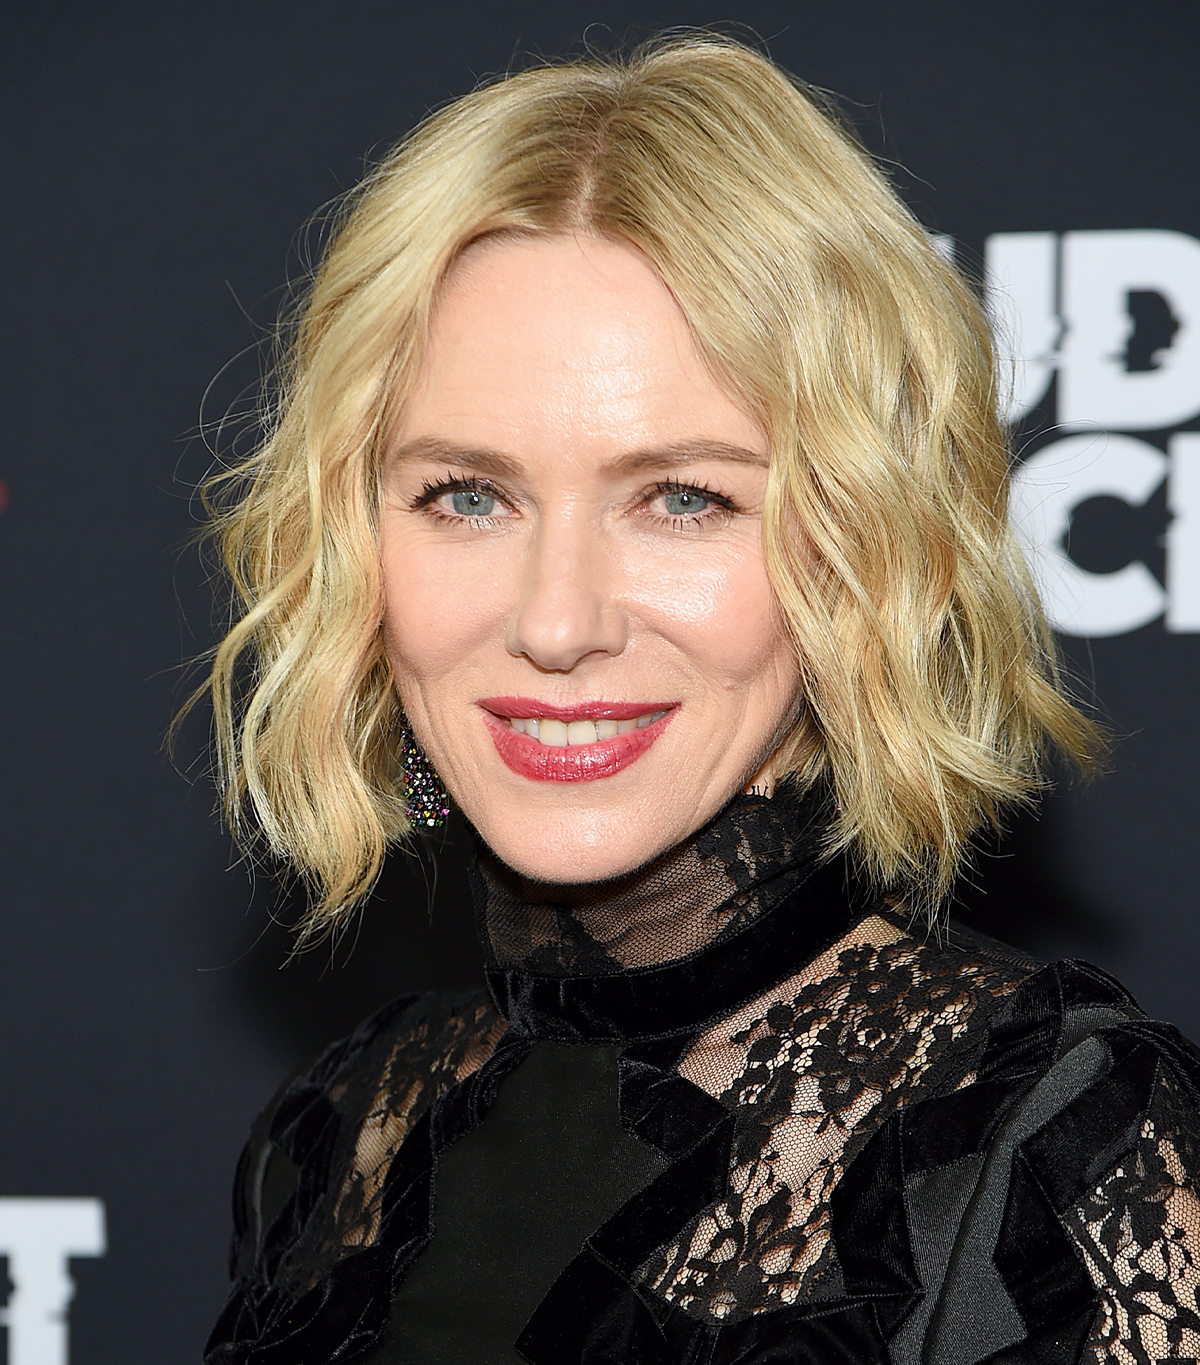 The Skincare Routine Naomi Watts Swears By for Glowing Skin | Who What Wear